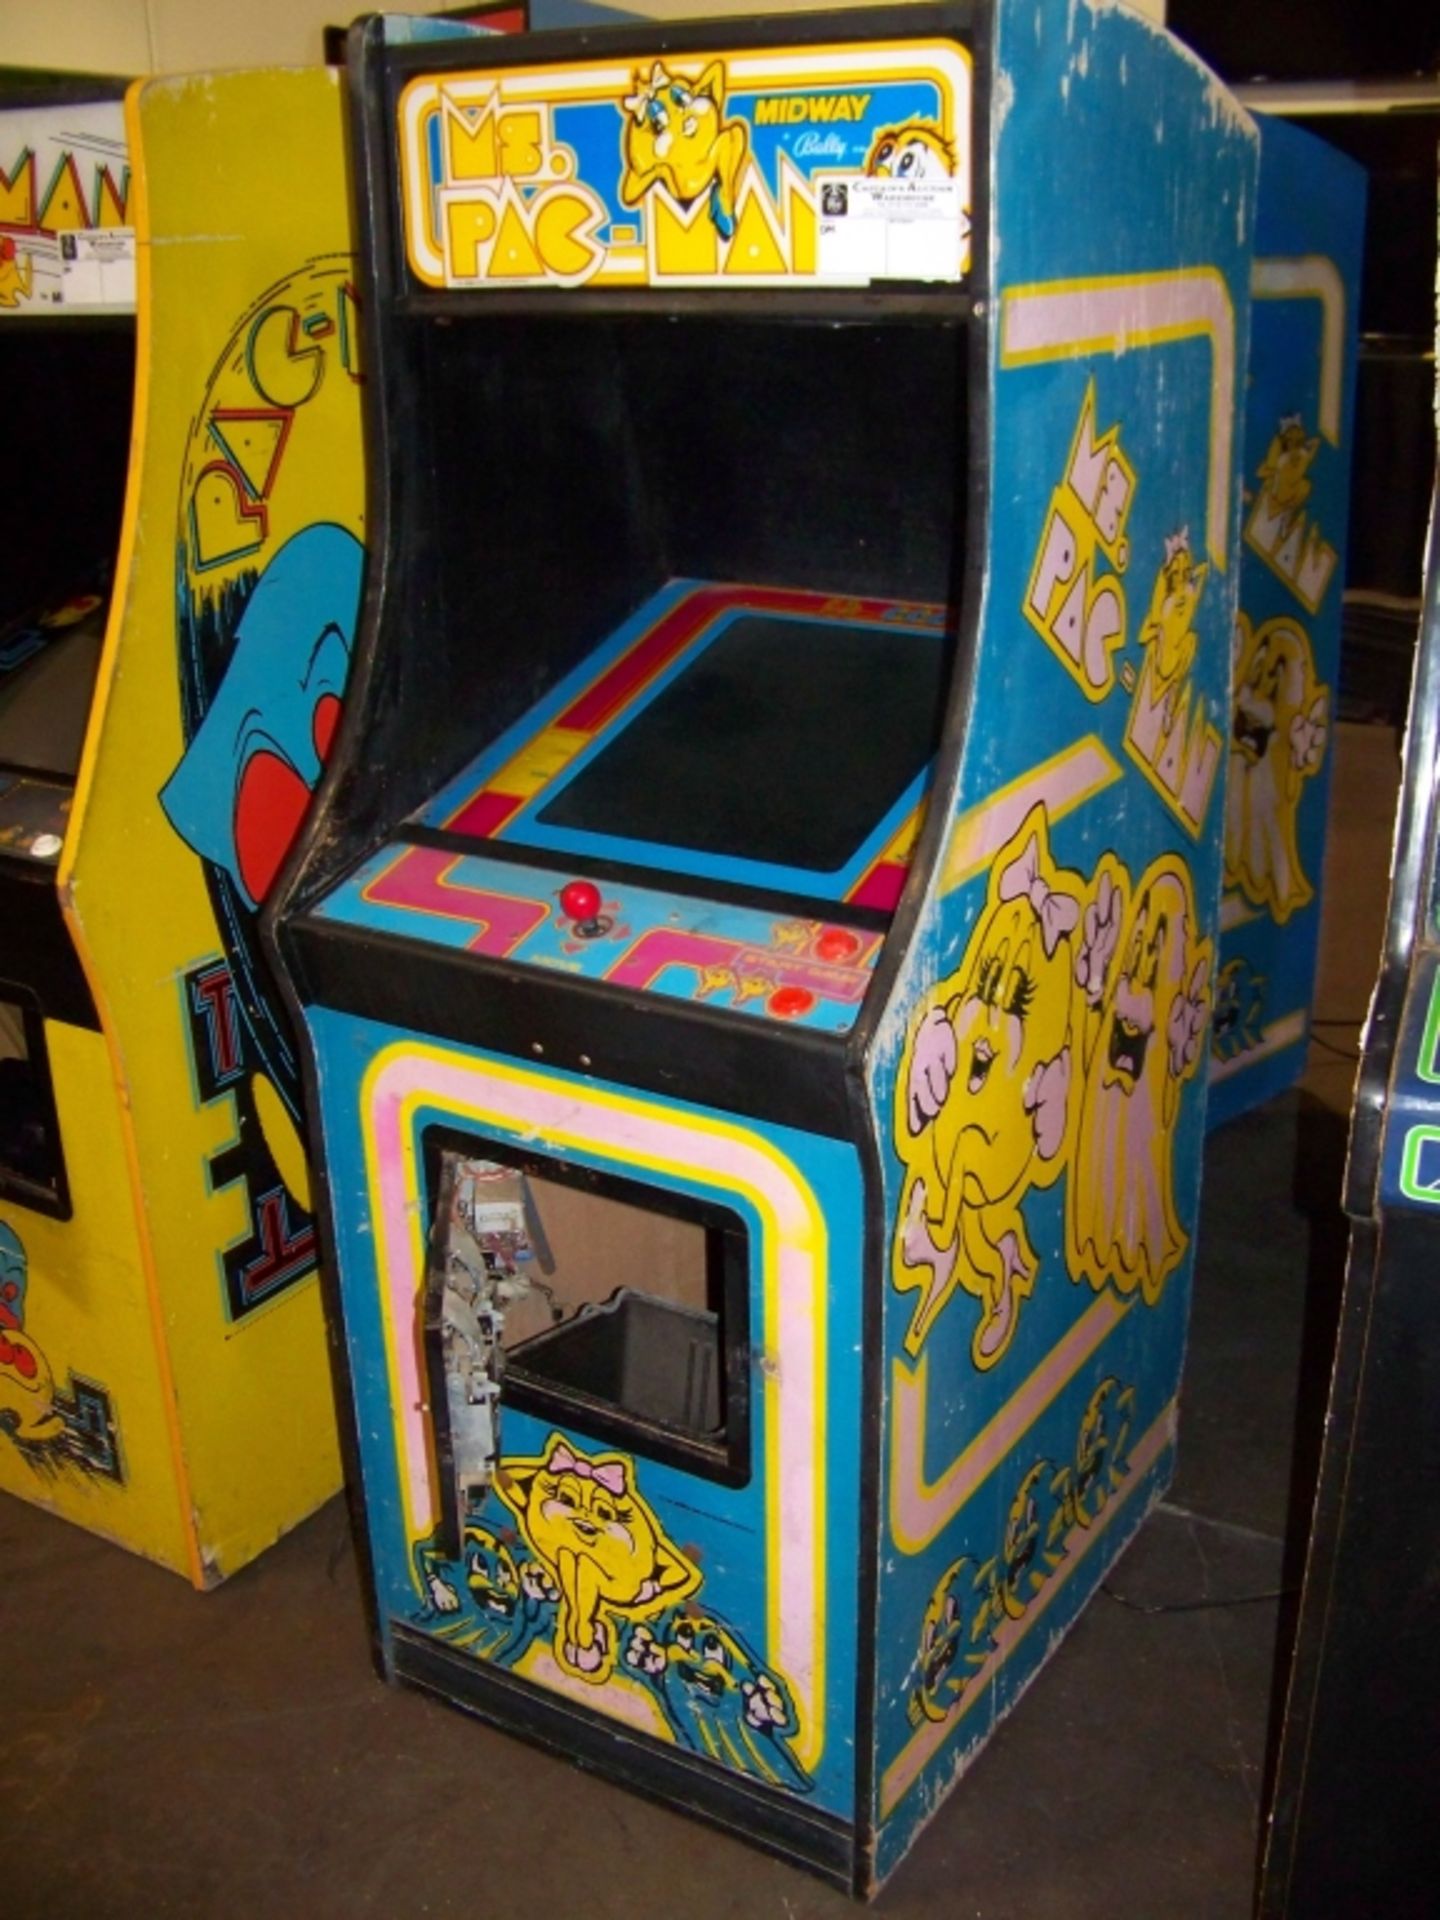 MS PACMAN CLASSIC ARCADE GAME MIDWAY Item is in used condition. Evidence of wear and commercial